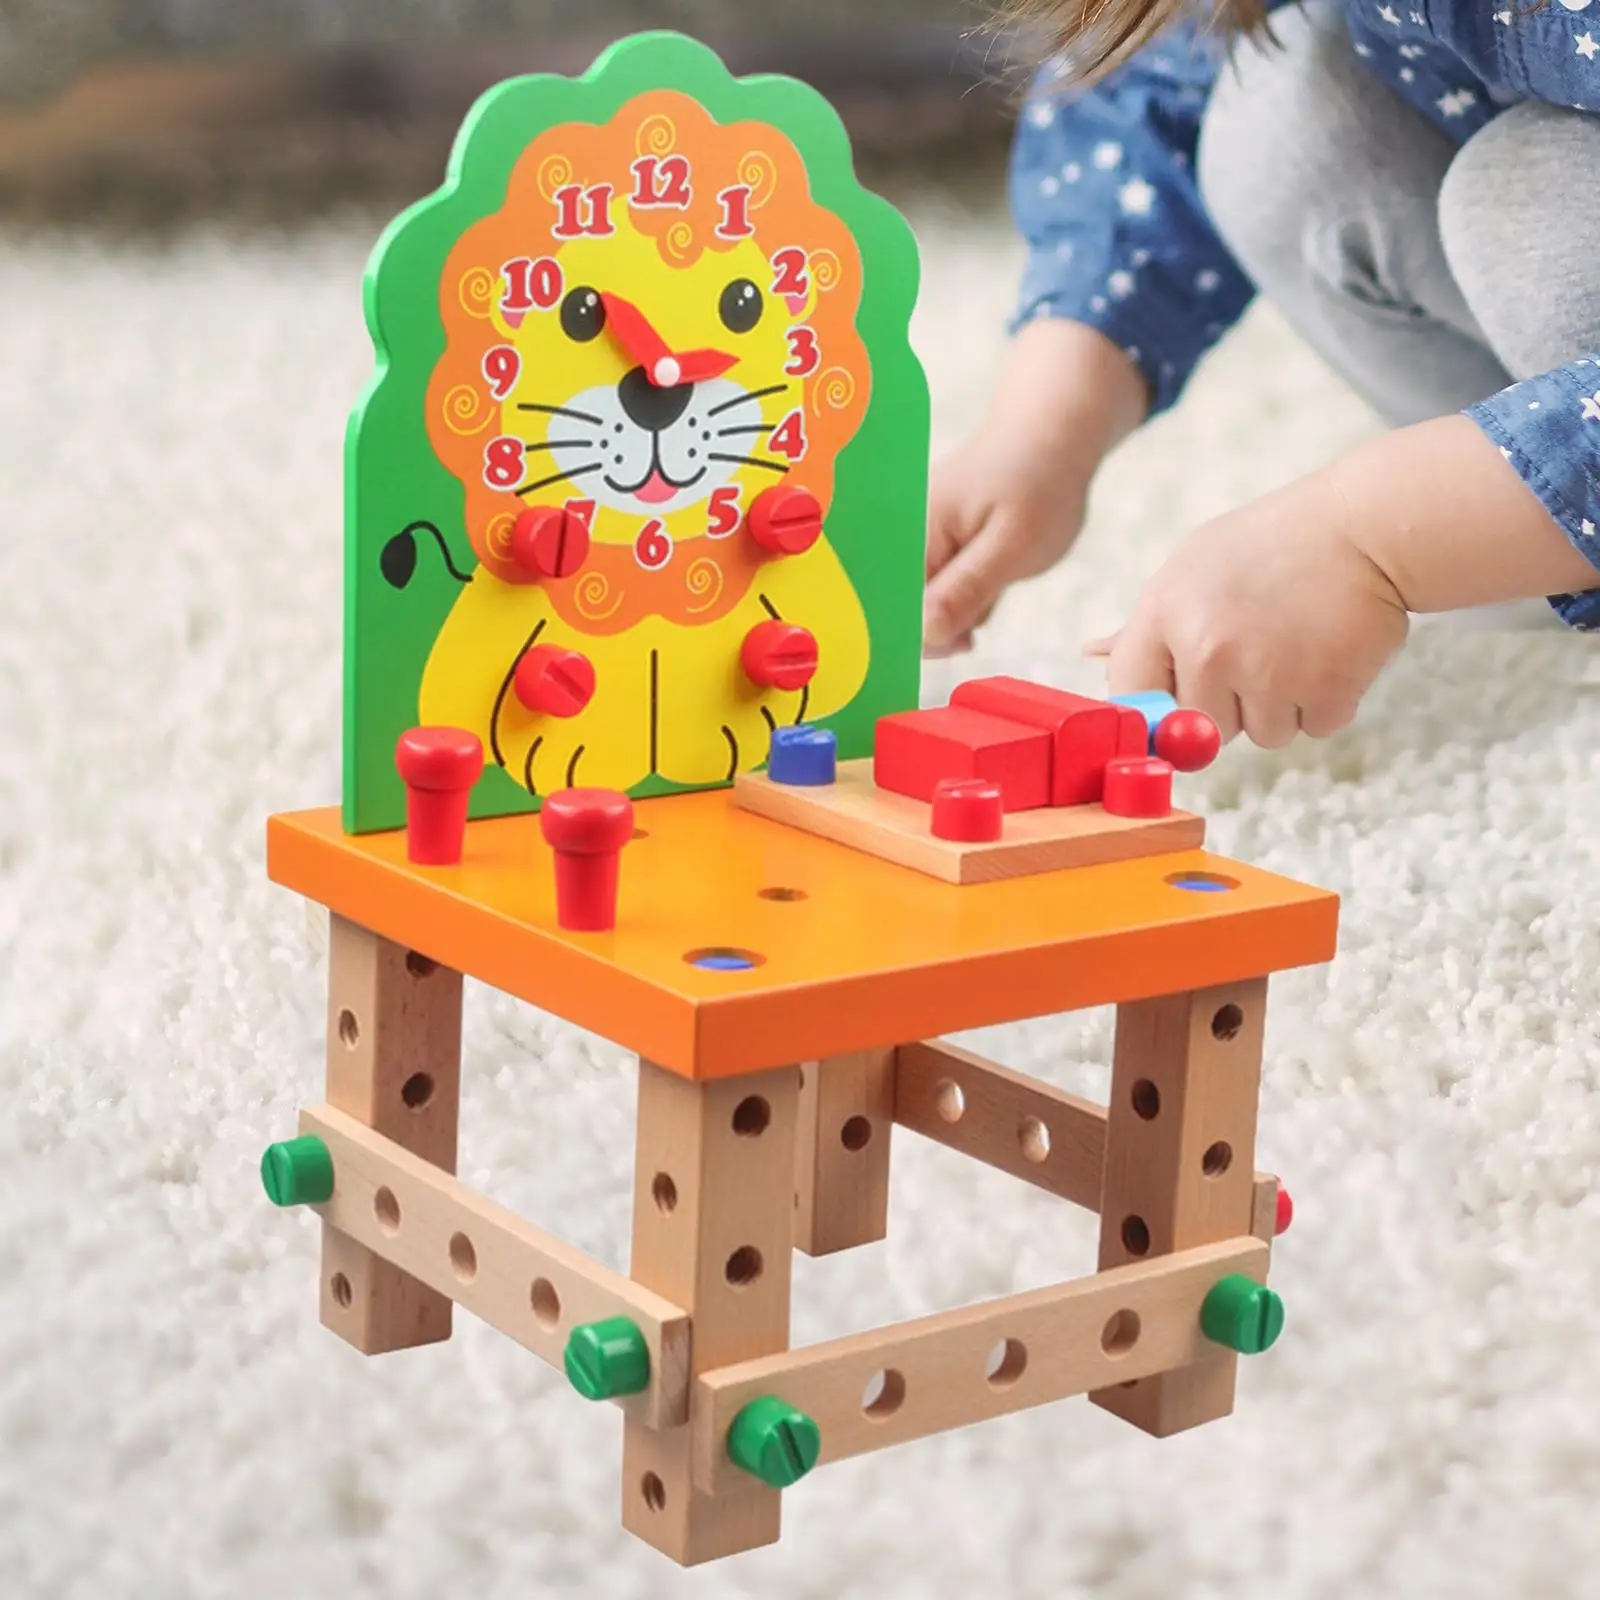 Wooden Assembling Chair Educational Building Toy with Tools Wooden Chair Models Construction Play Set for Children Girls Boys